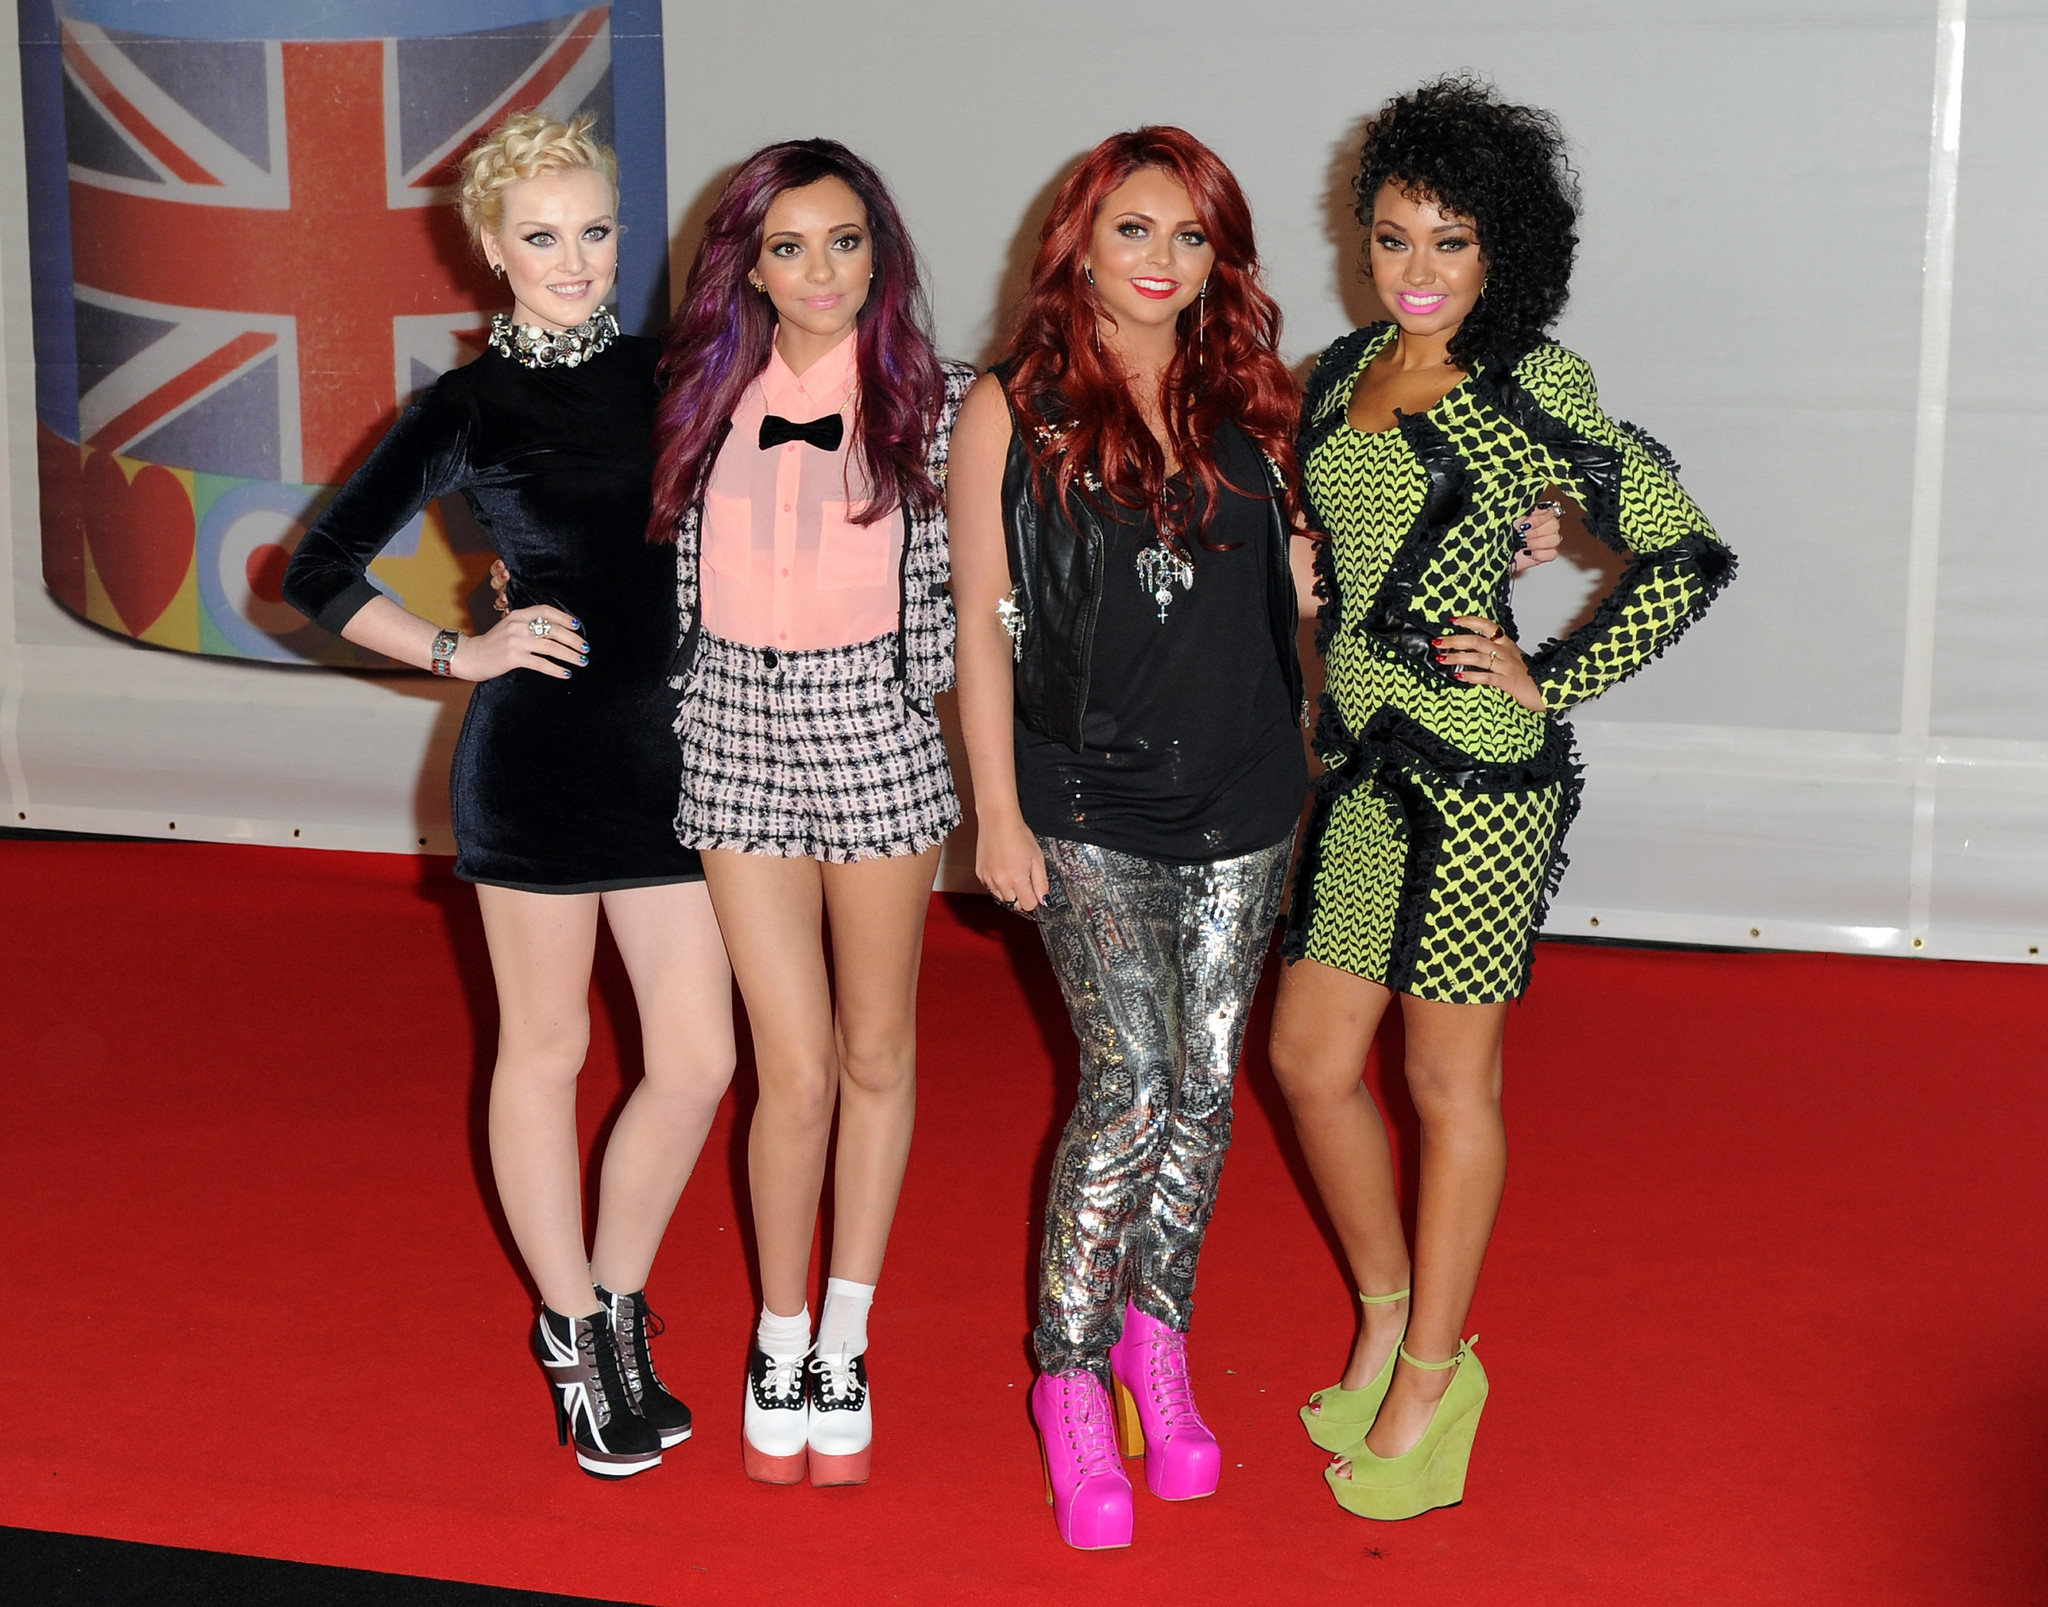 Perrie Edwards, Leigh-Anne Pinnock, Jesy nelson and Jade Thirwell of Little Mix .jpg